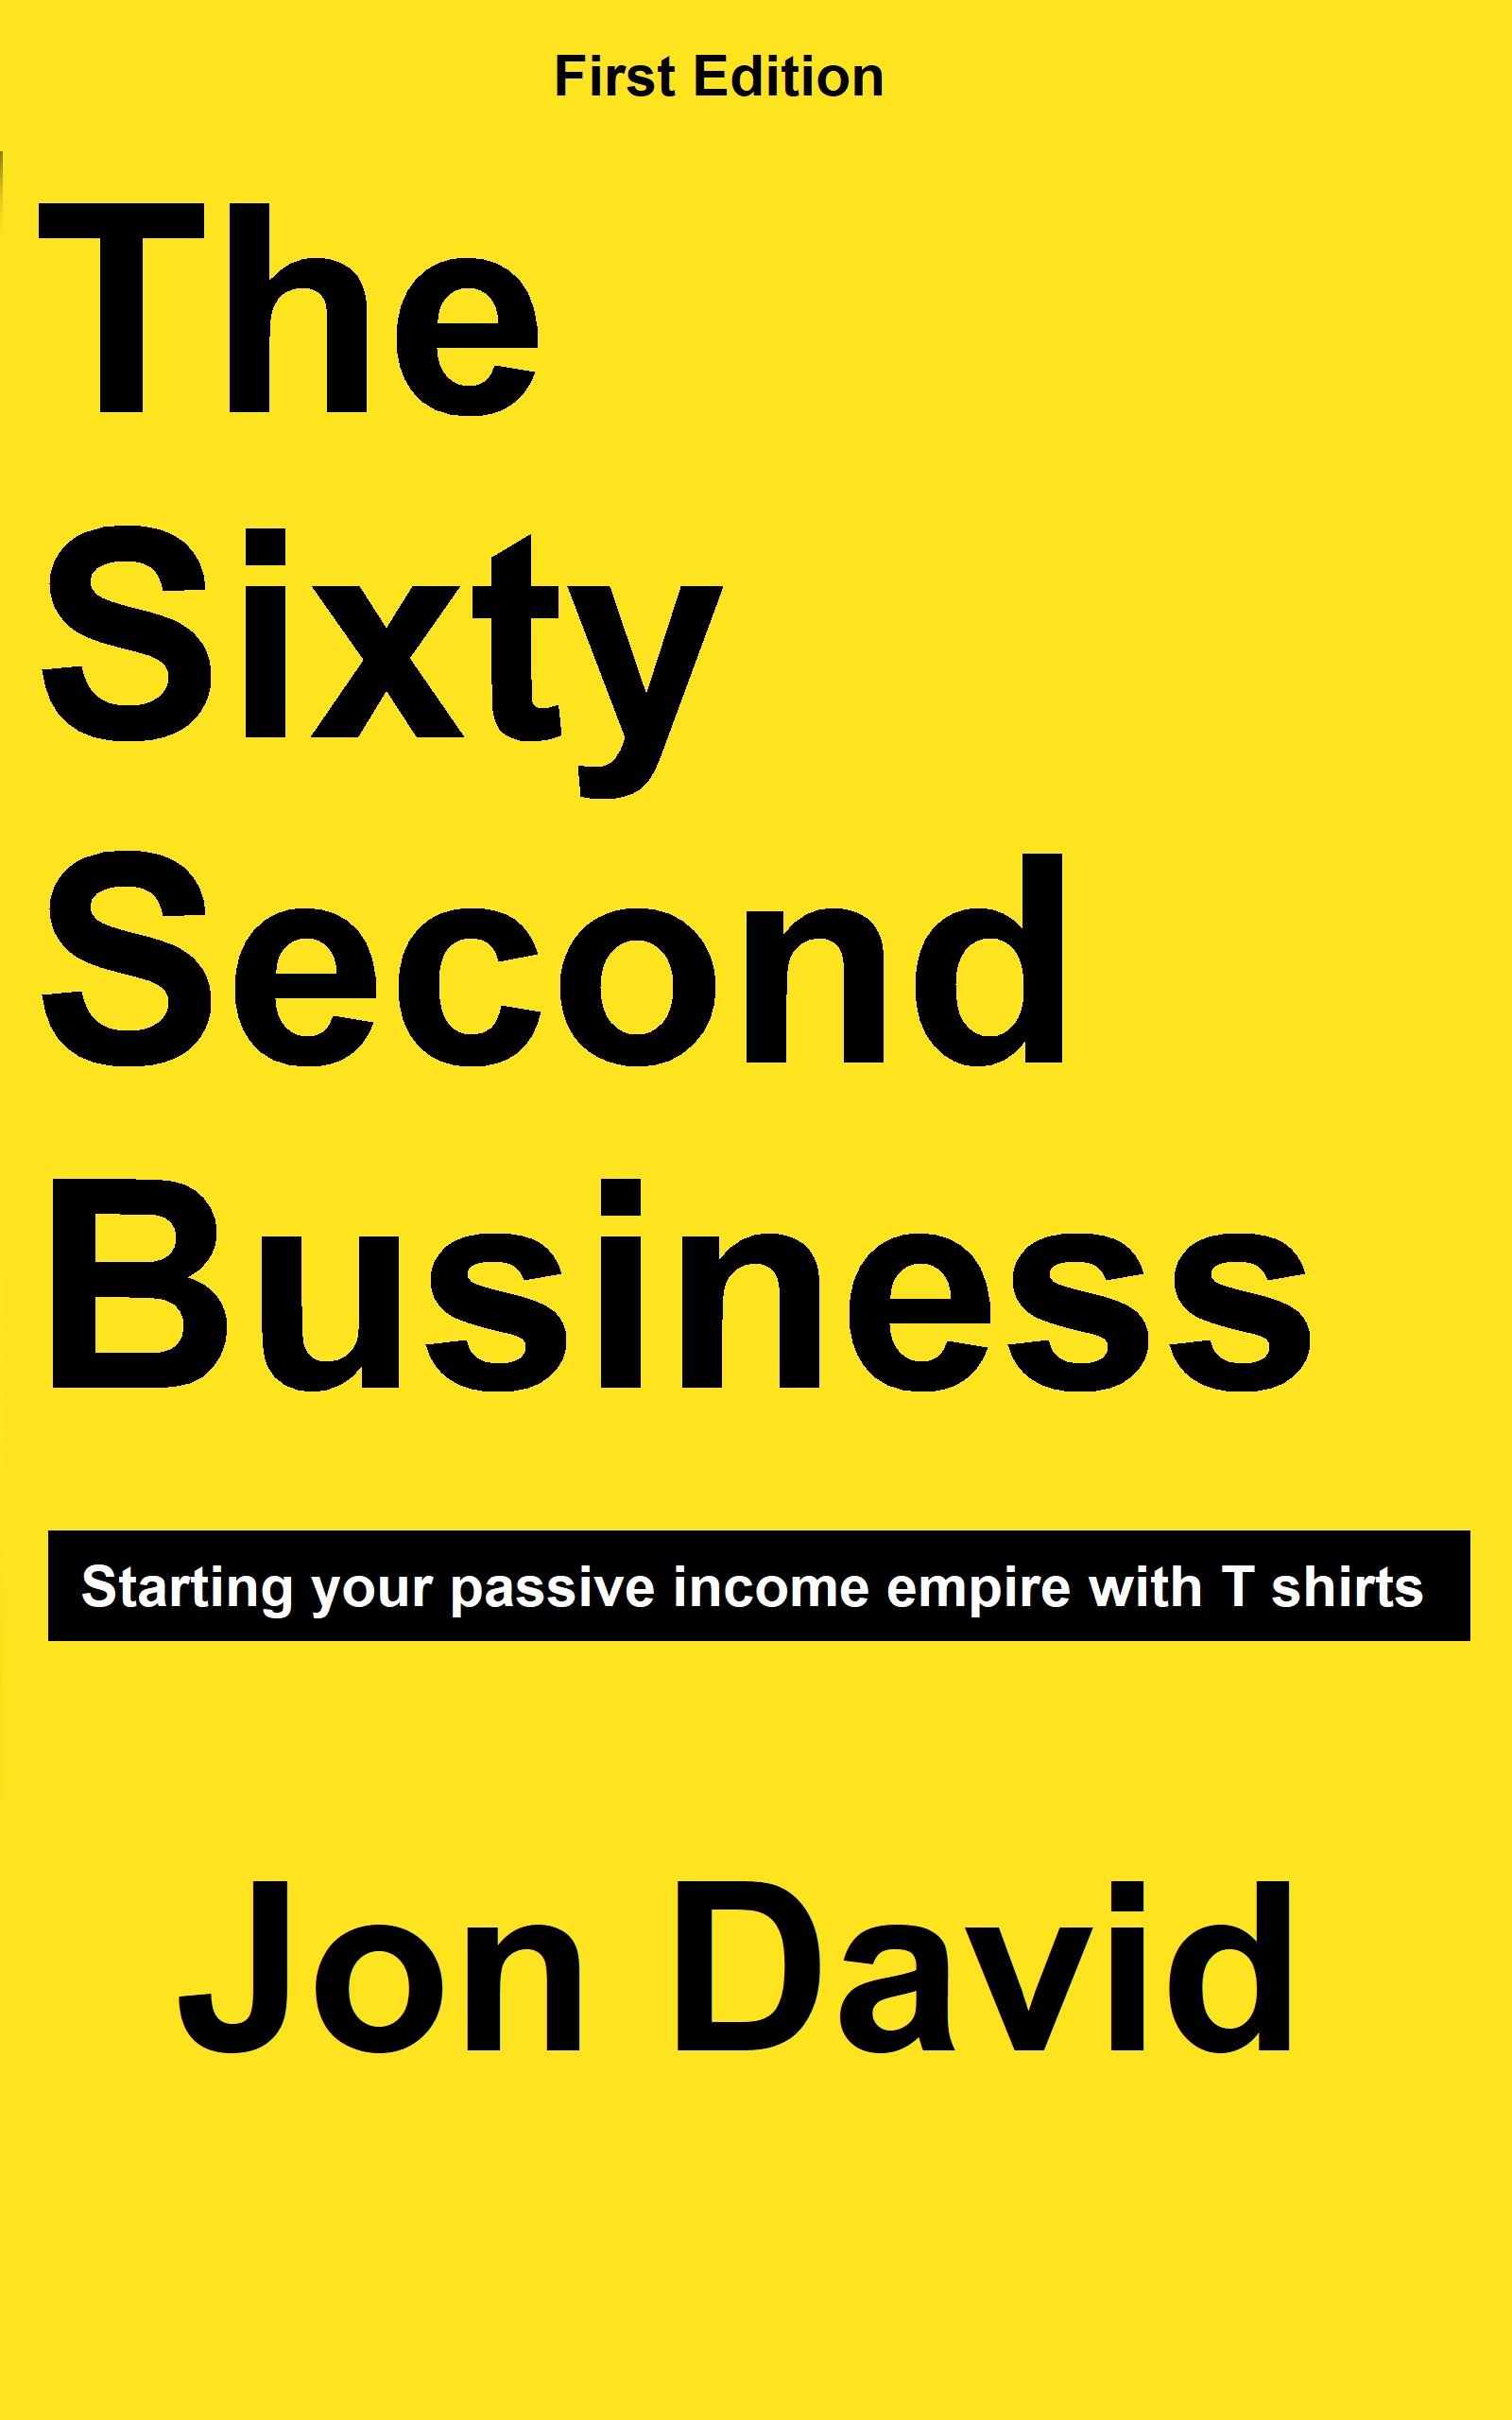 FREE: The Sixty Second Business by Jon David